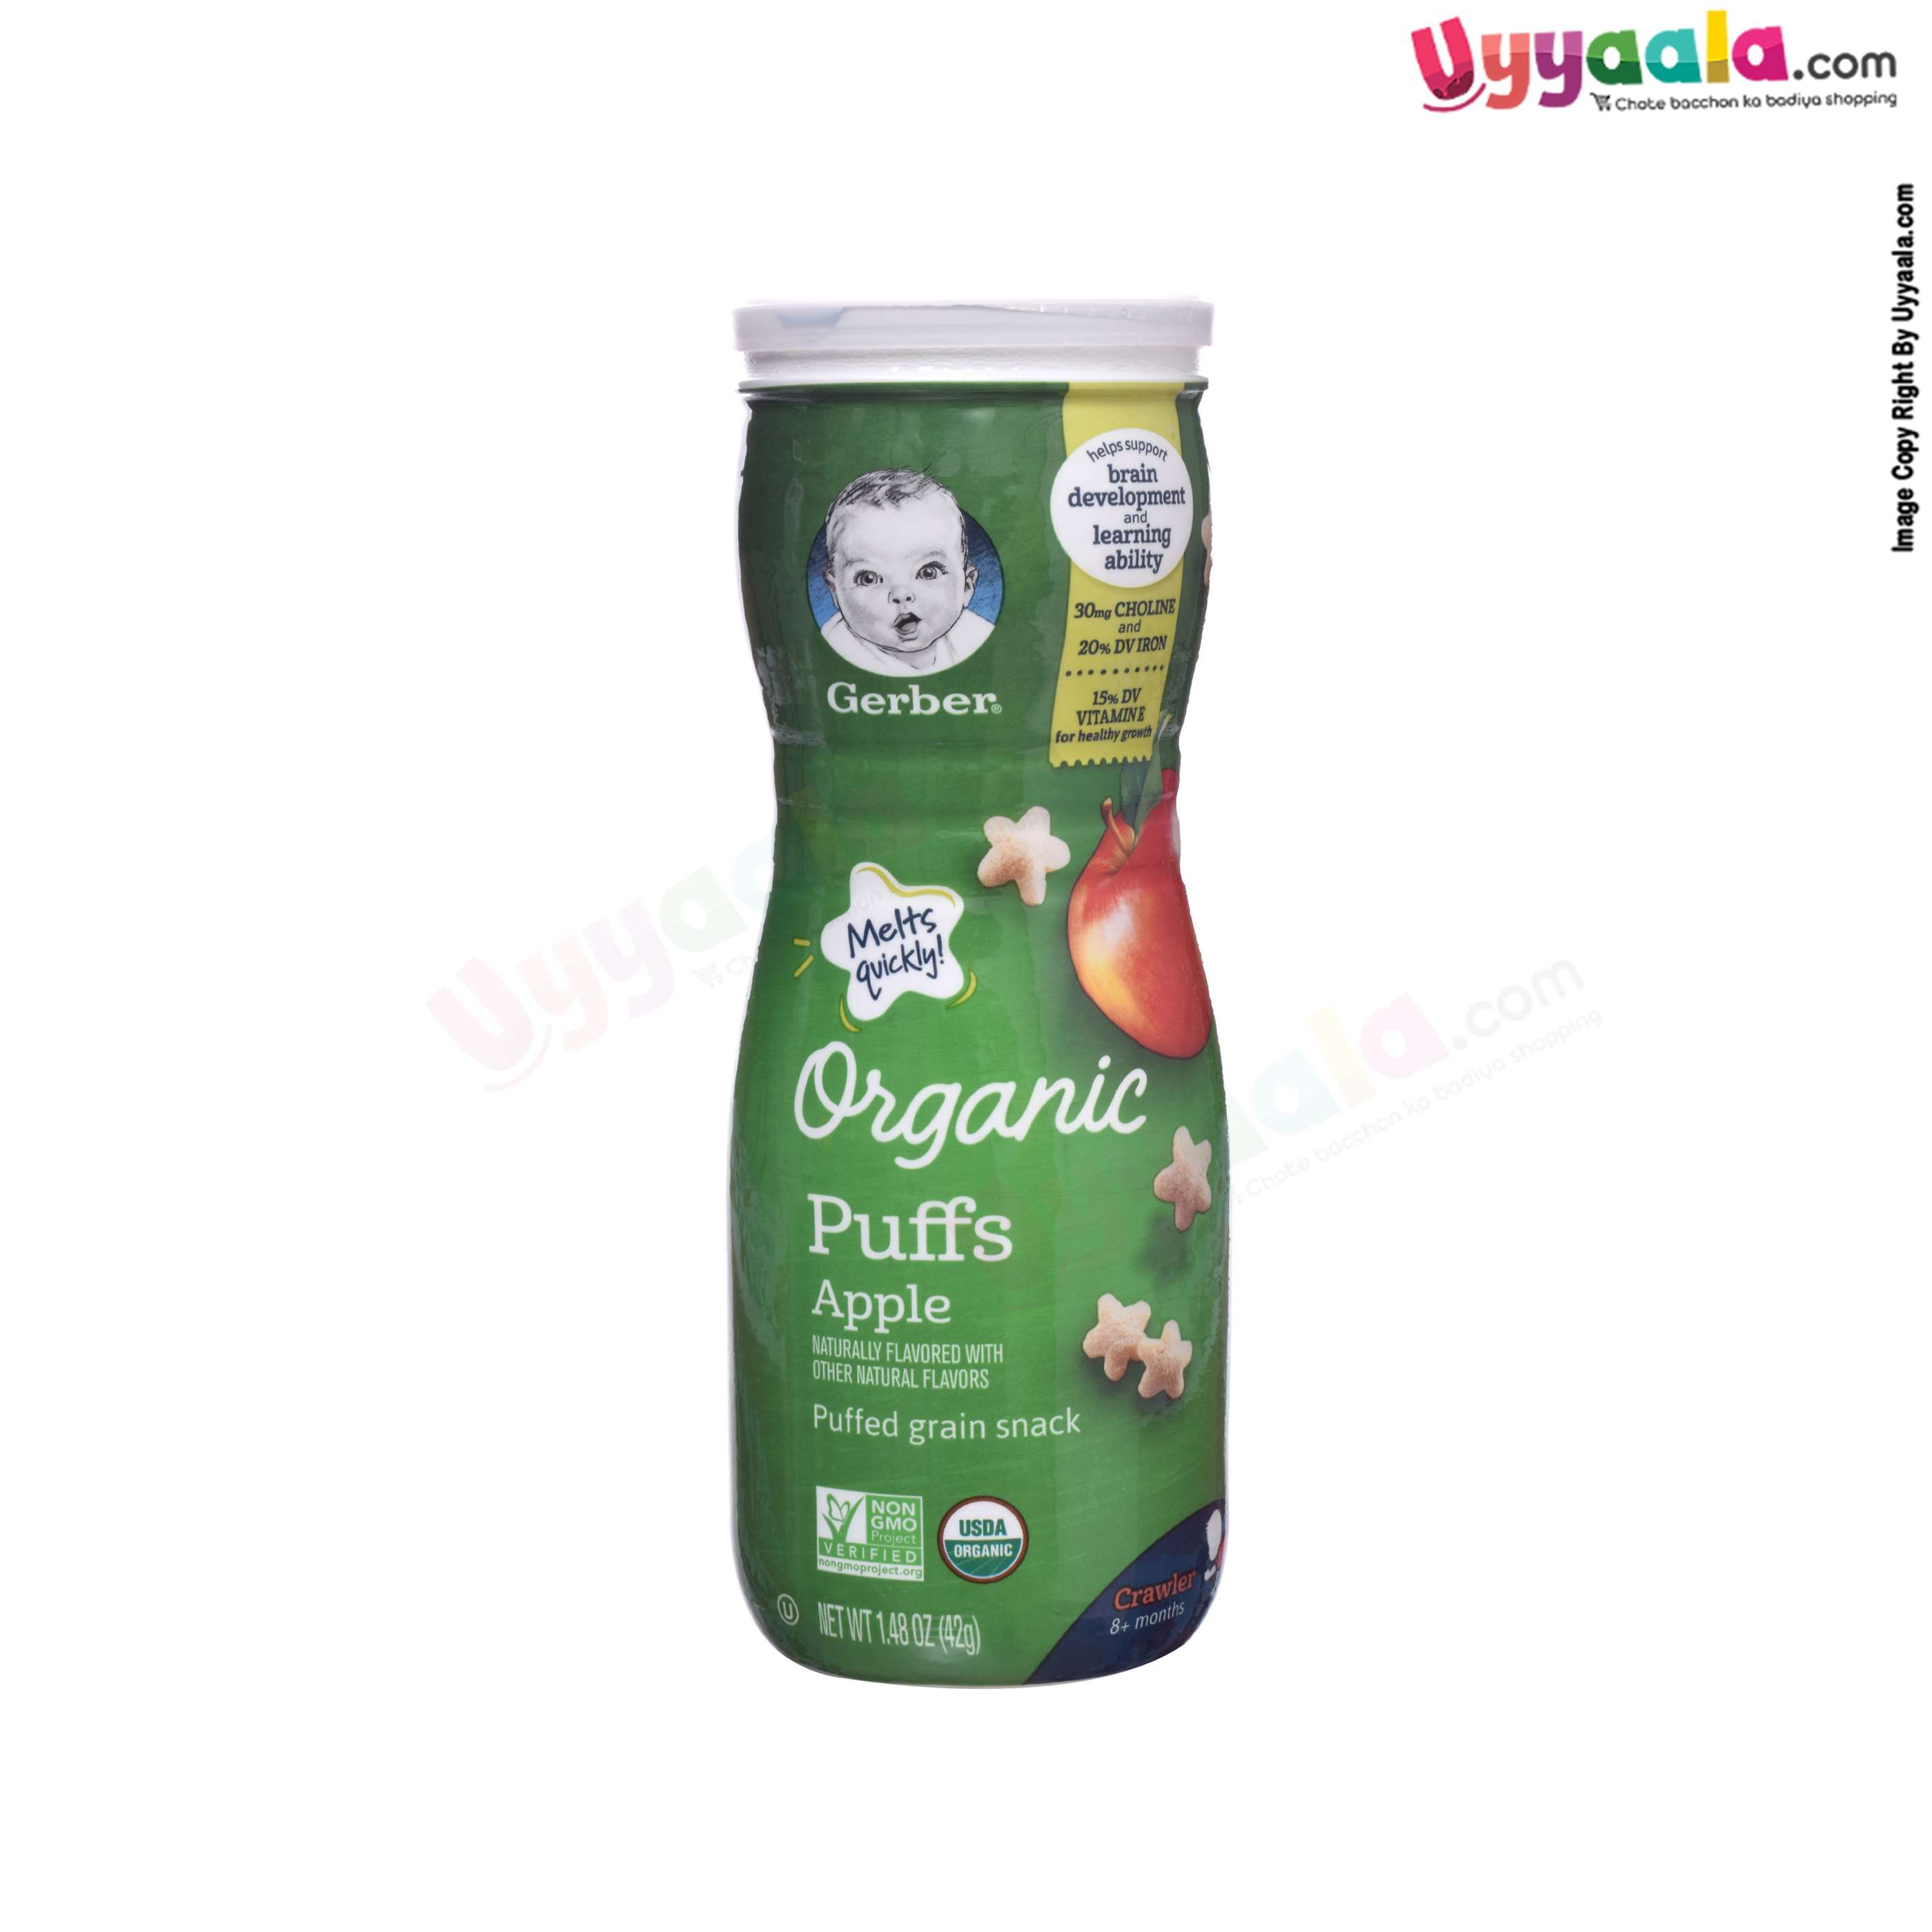 Buy Gerber Grain & Grow Organic Puffs for Babies in Apple flavour - 42gms Online in India at uyyaala.com